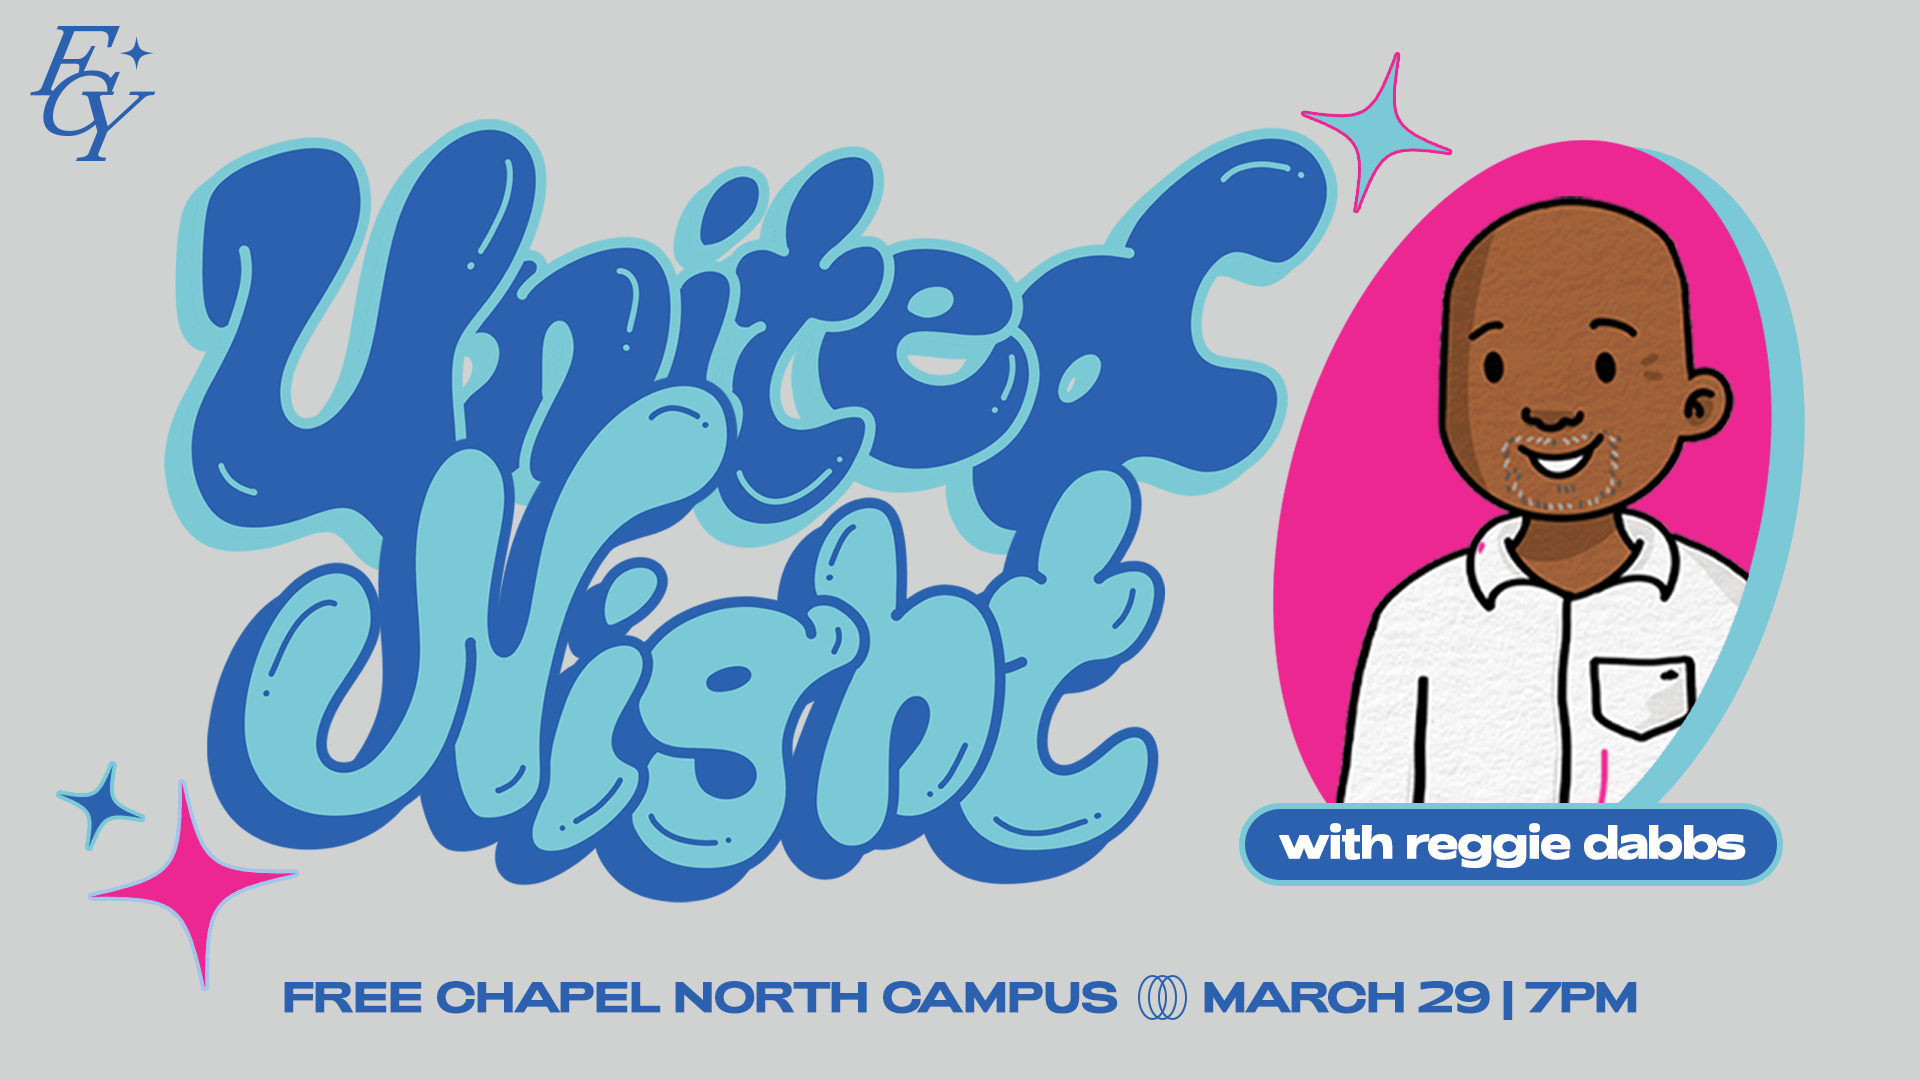 FCY United Night with Reggie Dabbs at the Gwinnett campus